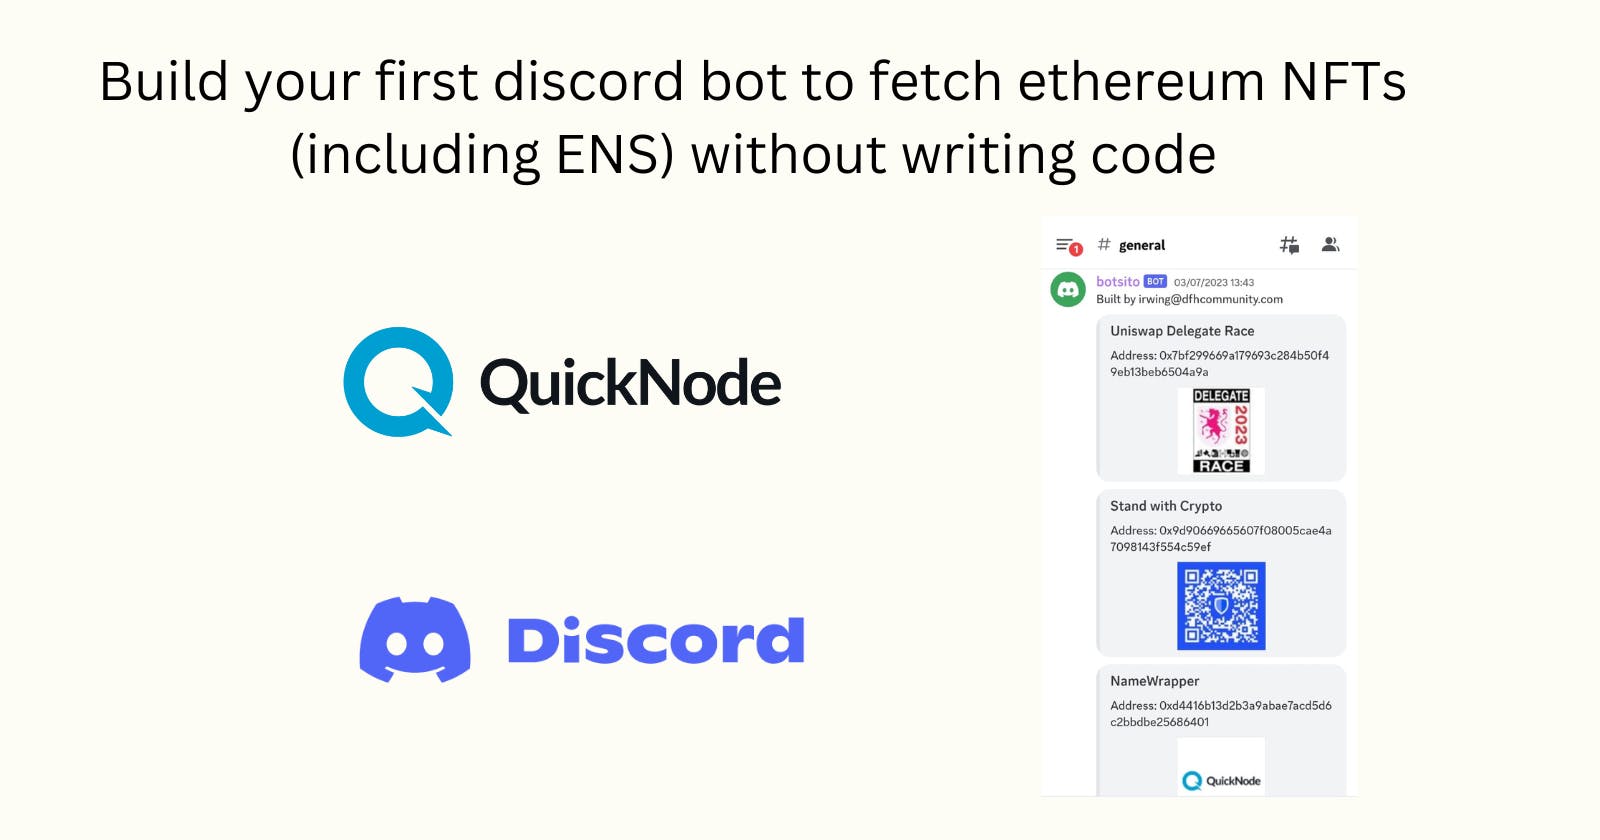 Build your first discord bot to fetch ethereum NFTs (including ENS) without writing code